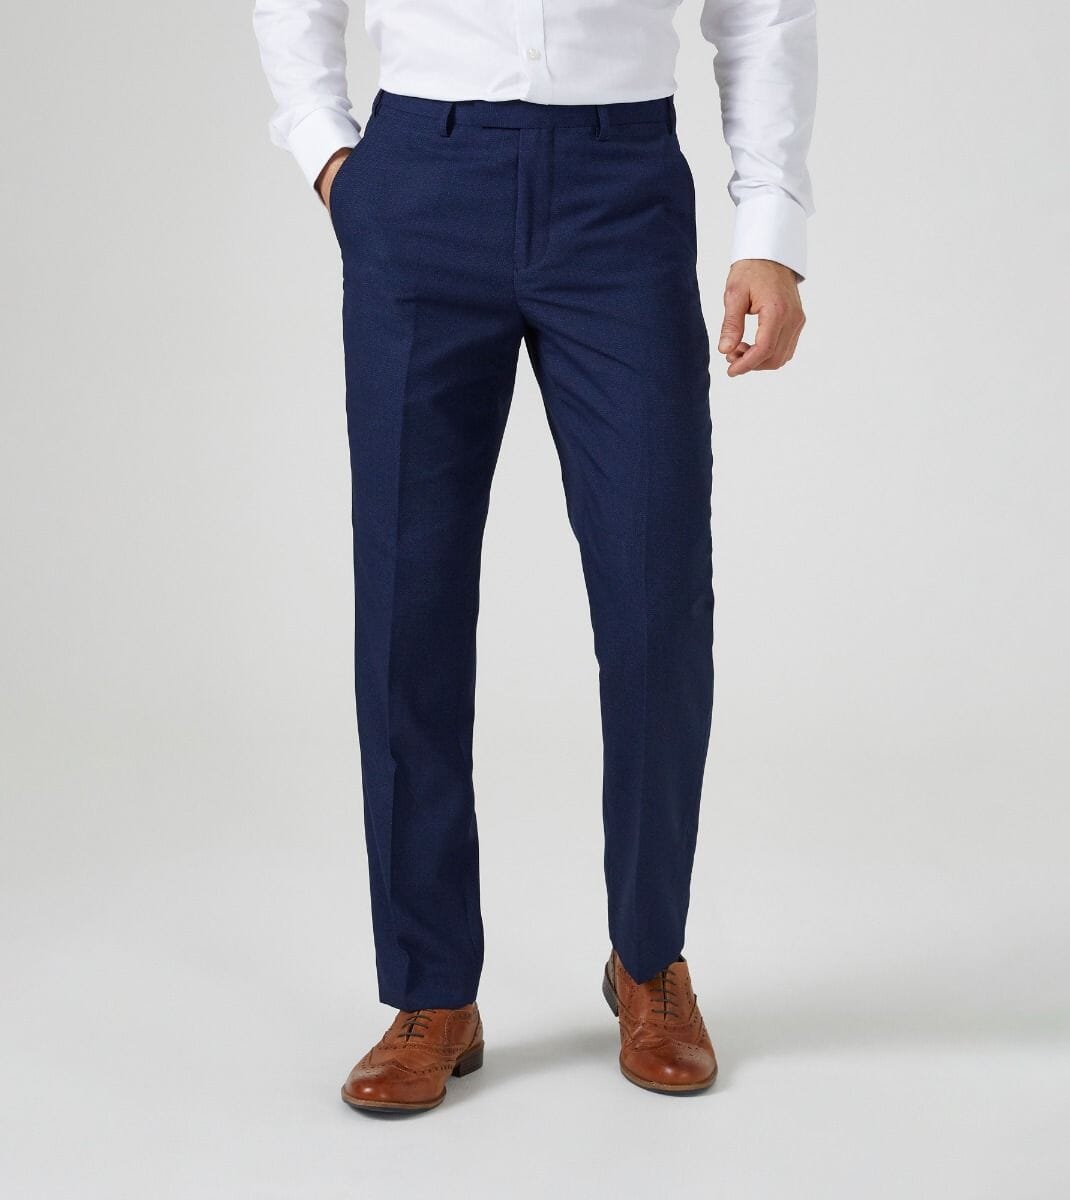 Harcourt Navy Trousers - Trousers - 28R - THREADPEPPER